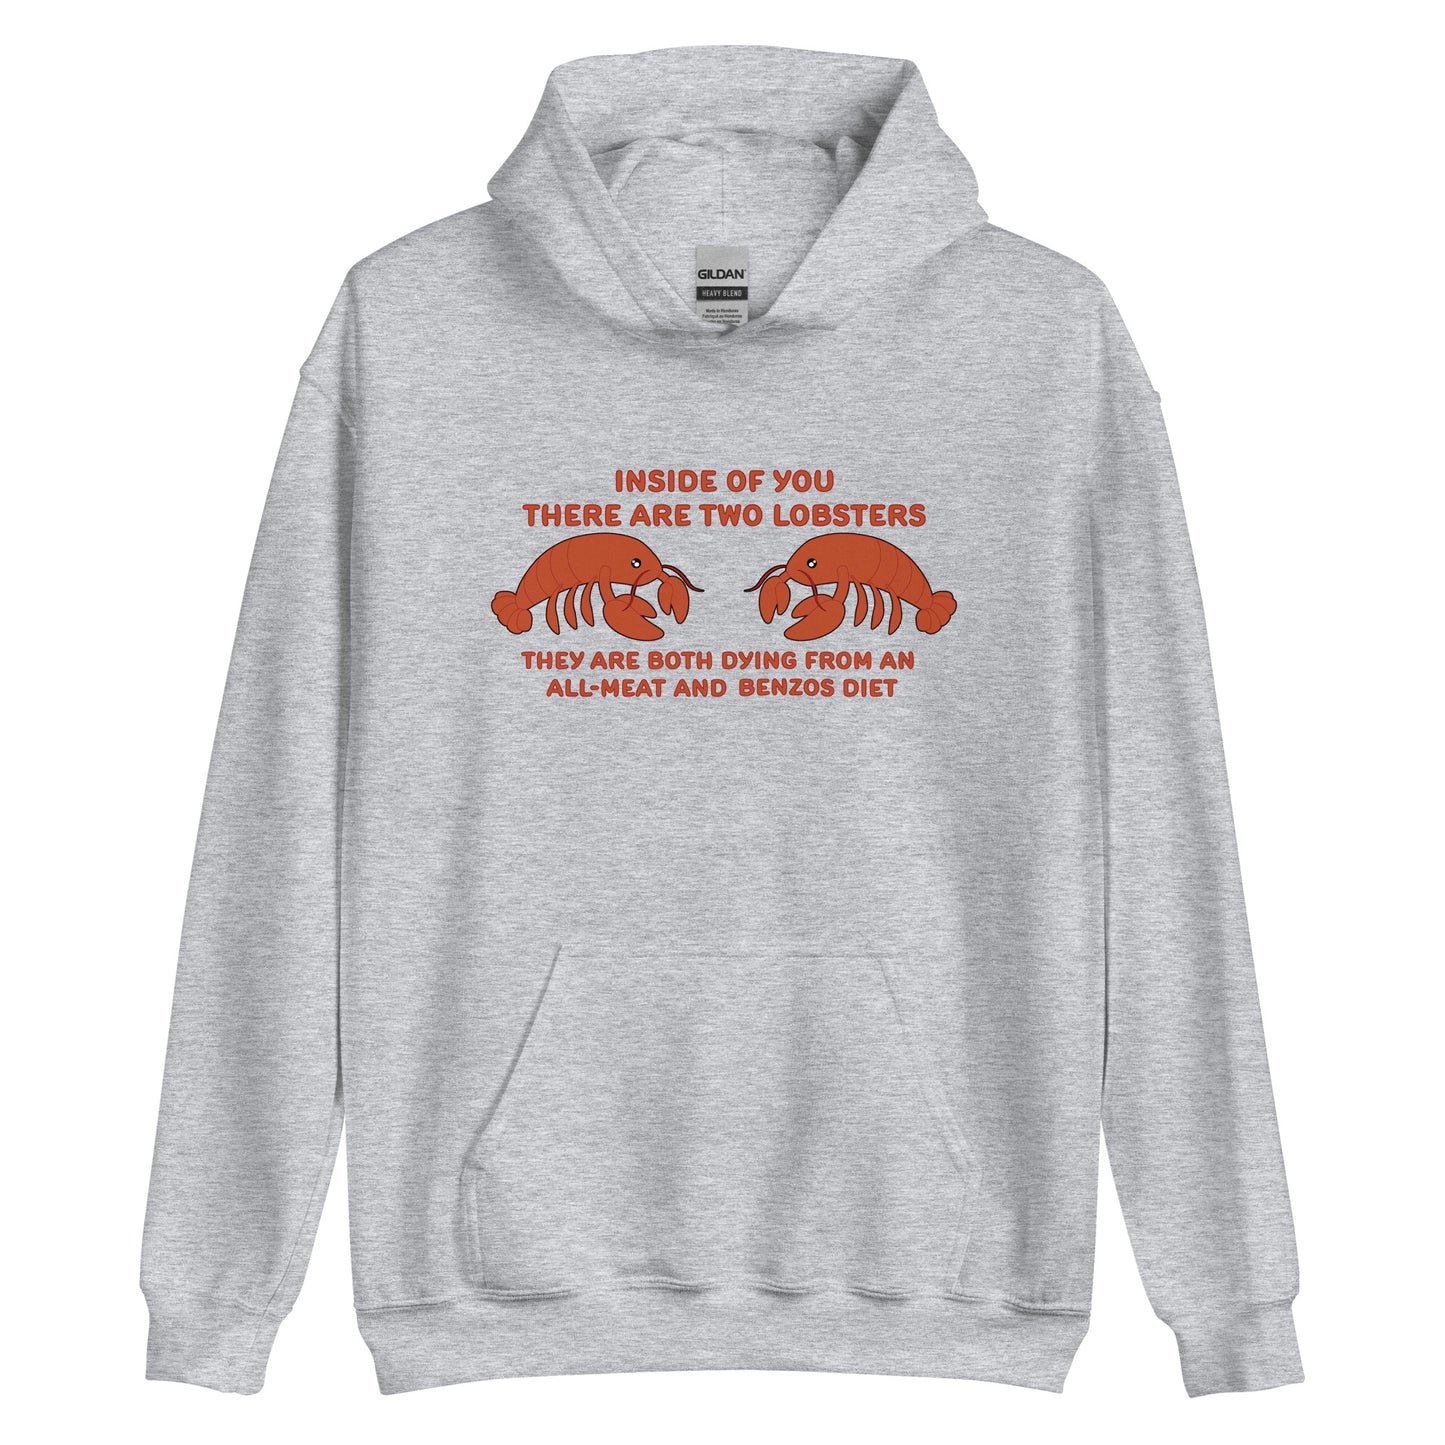 A light grey hooded sweatshirt featuring an illustration of two lobsters. Text around the lobster reads "Inside Of You There Are Two Lobsters" "They are both dying from an all-meat and benzos diet."